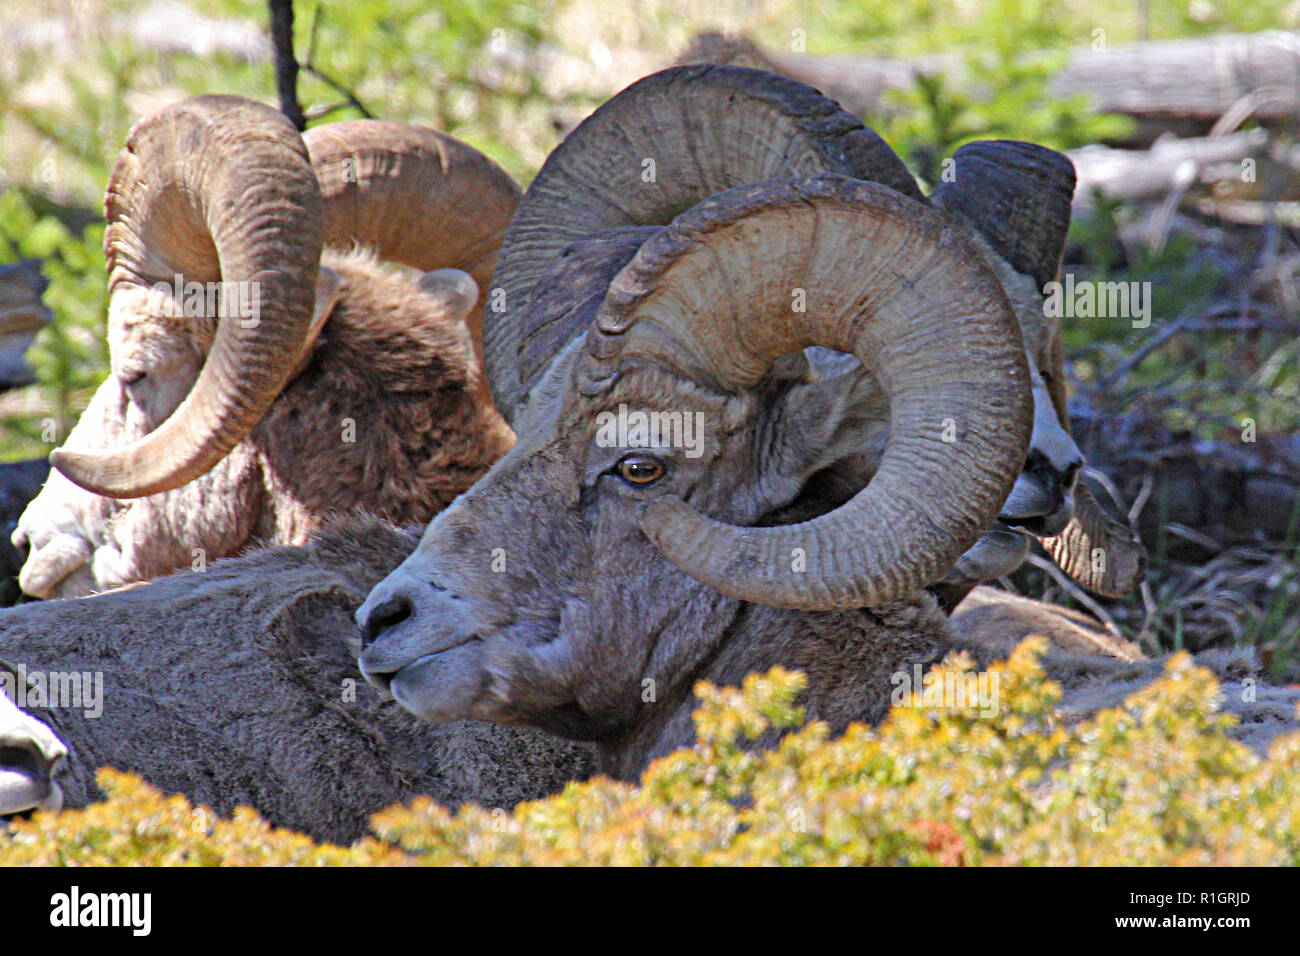 Big Horn Sheep in the Canadian Rockies in Banff National Park, Alberta, Canada Stock Photo